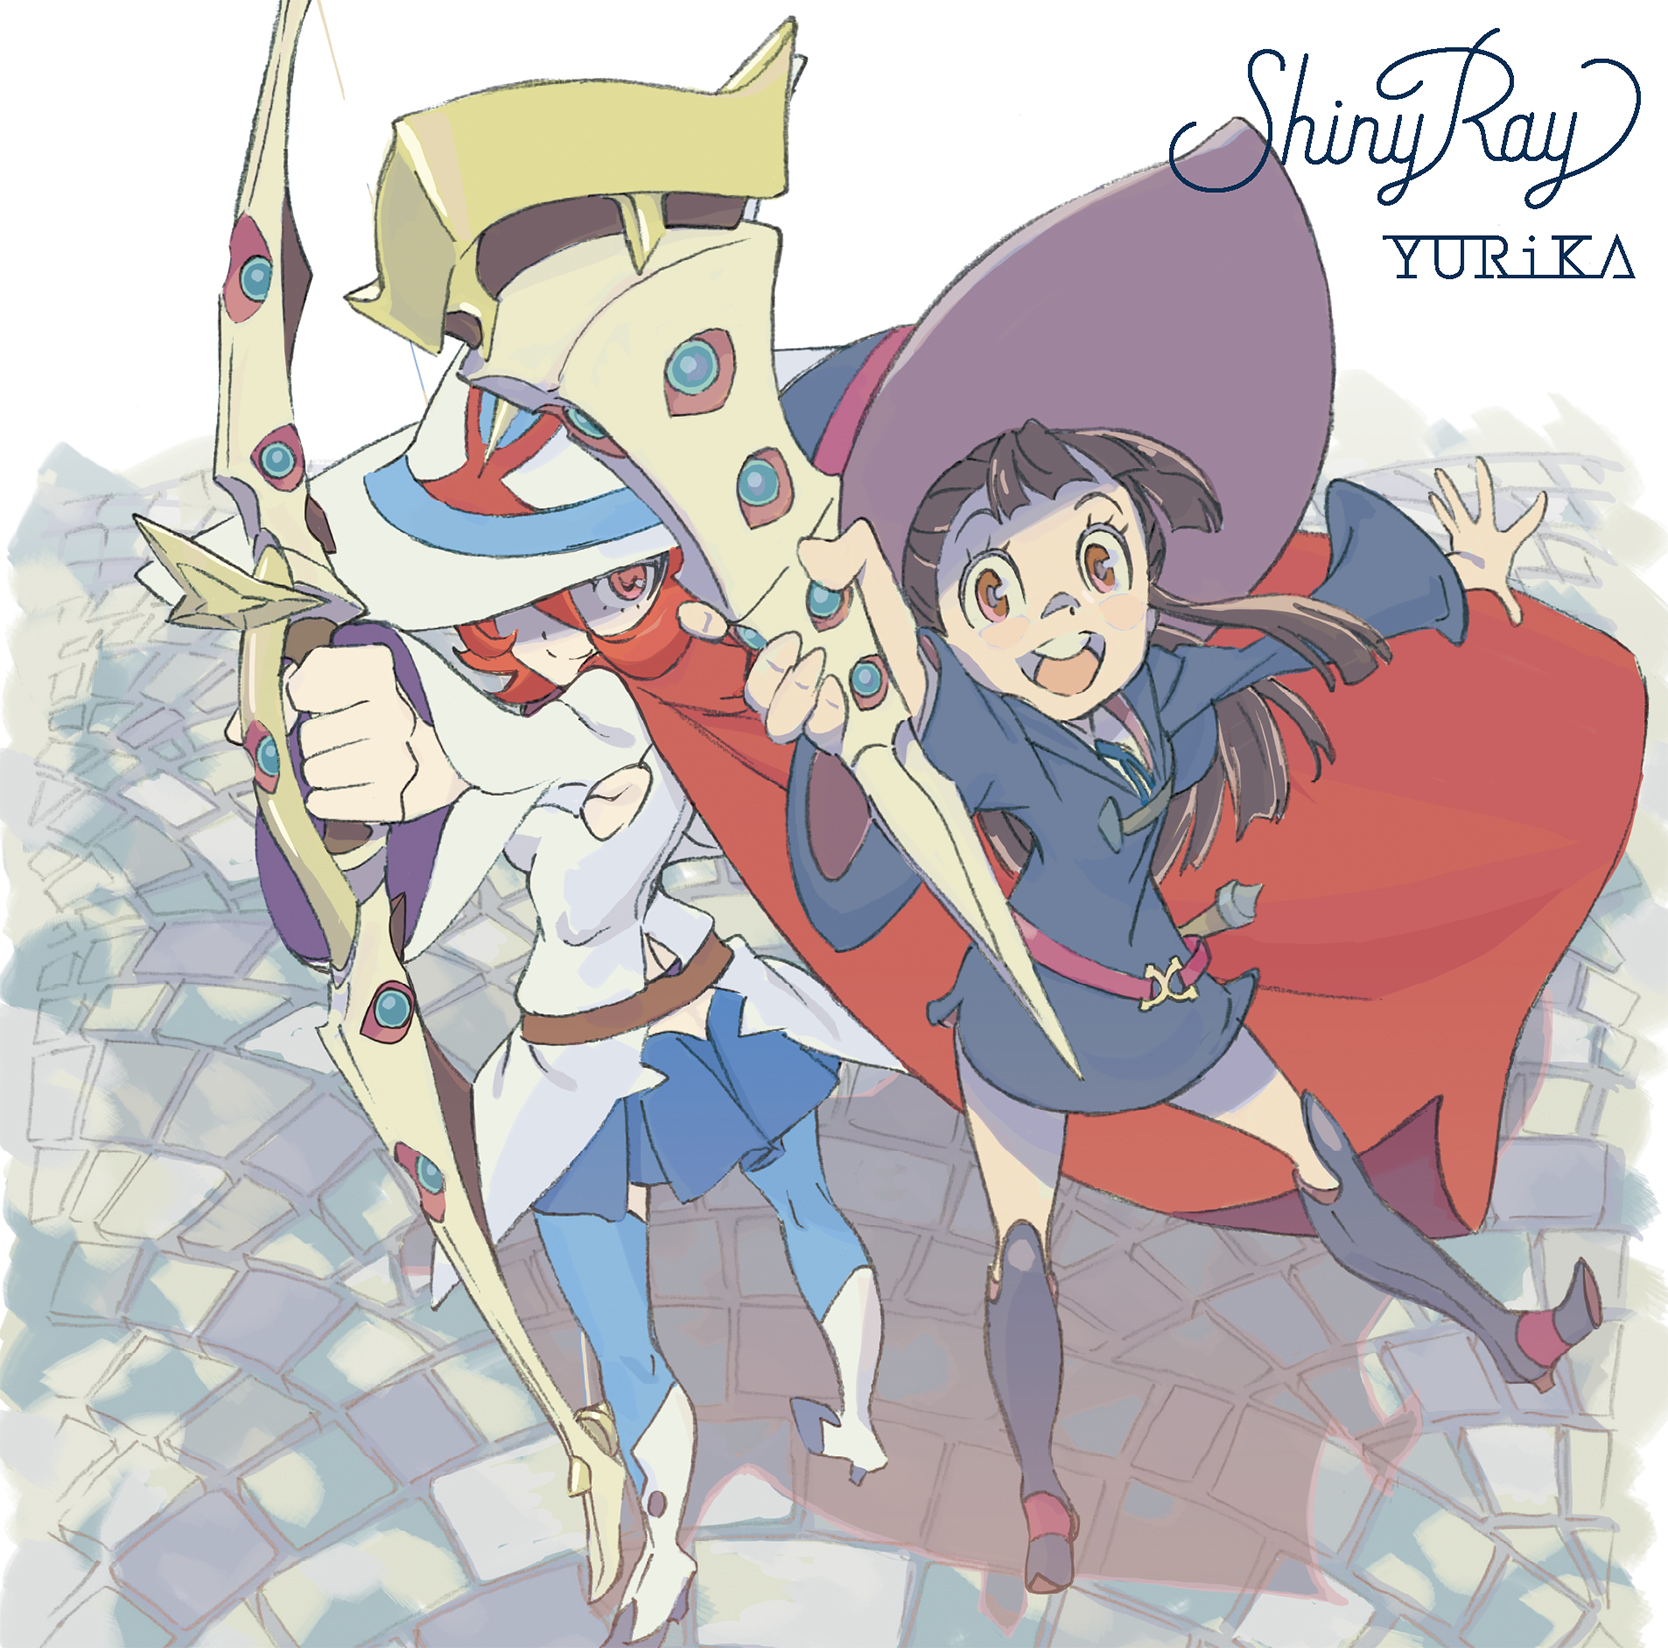 Little Witch Academia Wiki